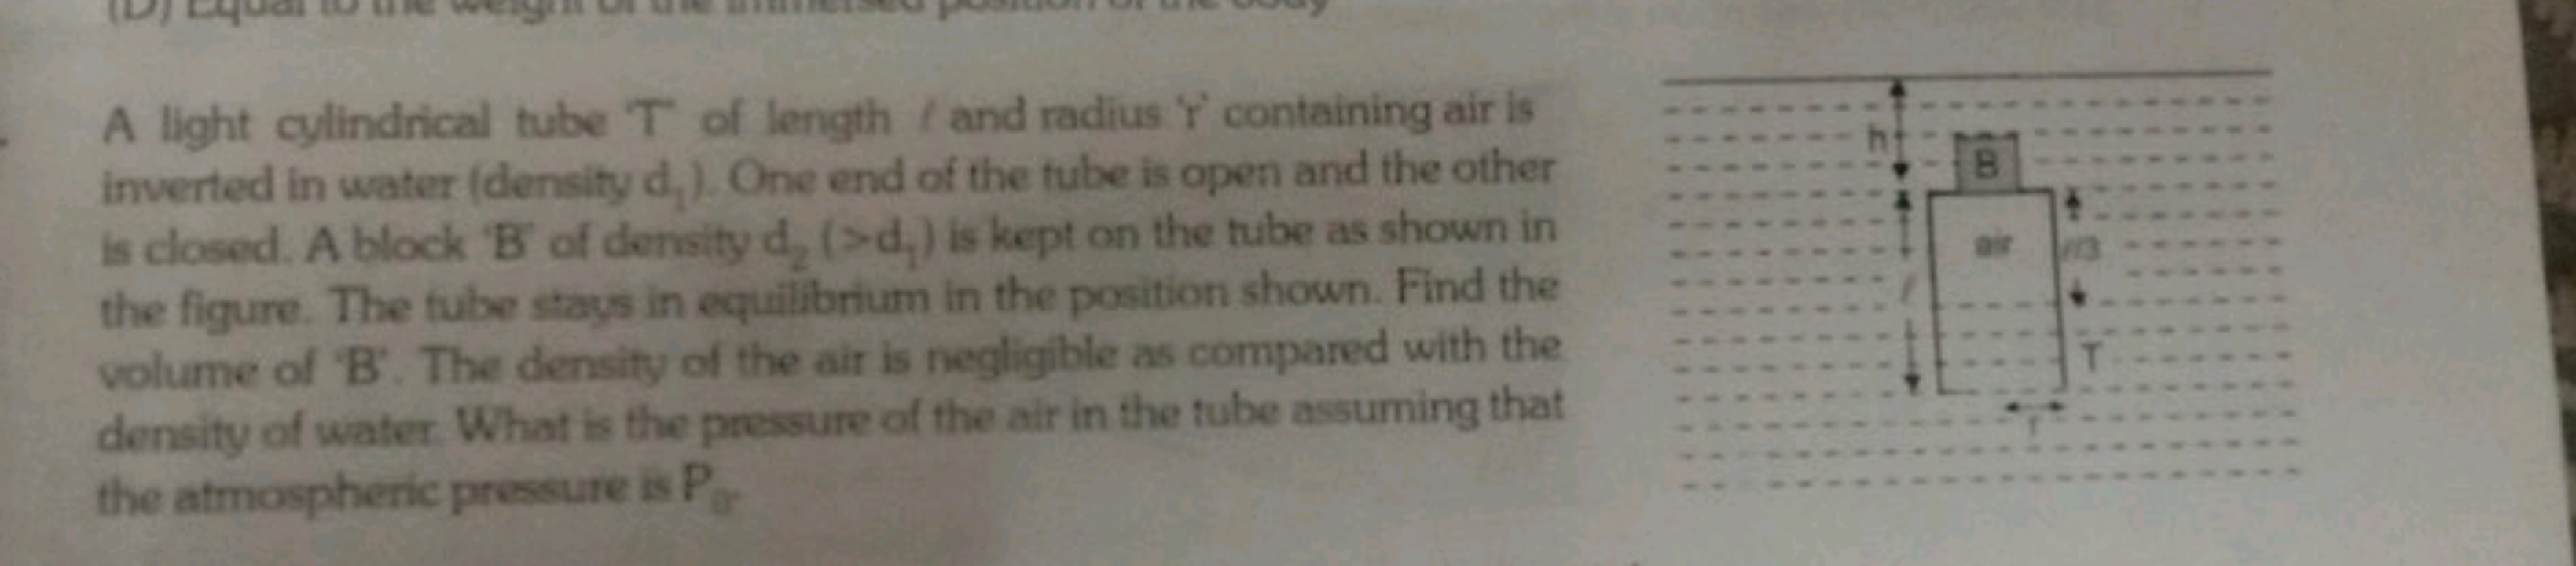 A light cylindrical tube ' T ' of length t and radius ' Y ' containing